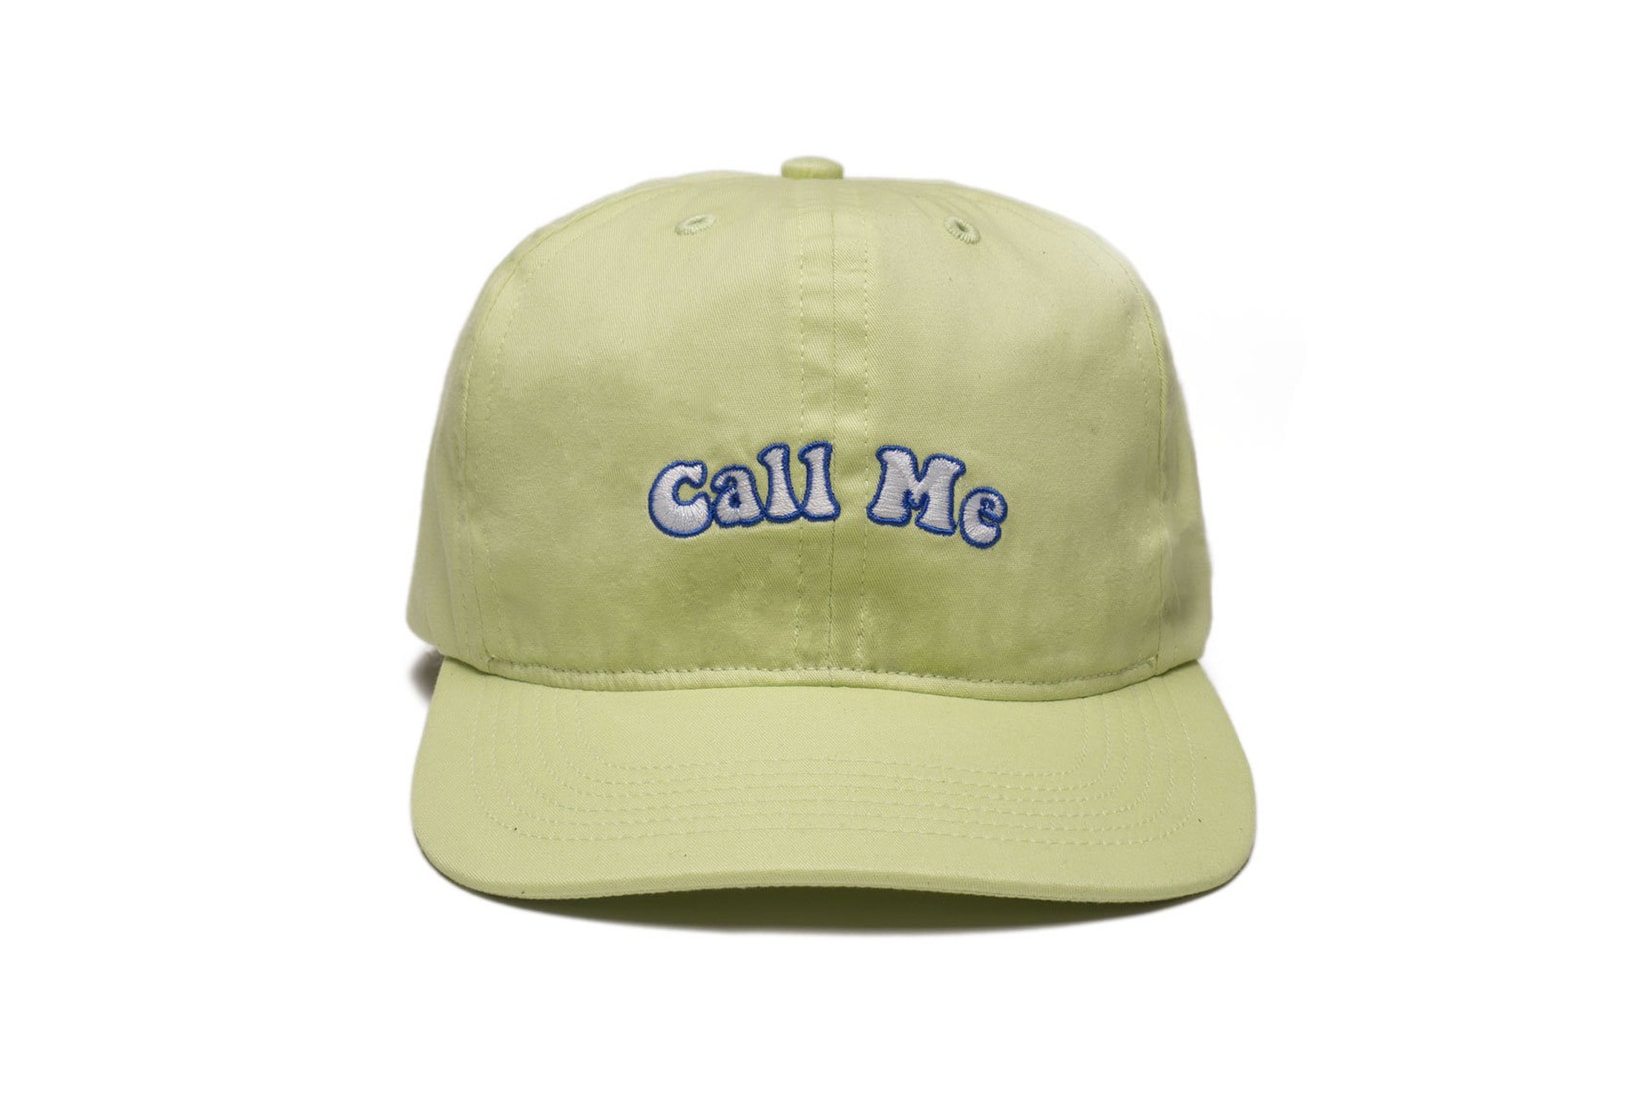 Call Me 917 2017 August 18 Drop Delivery T Shirts Tees Hats Caps Pin Skate Decks Skateboards